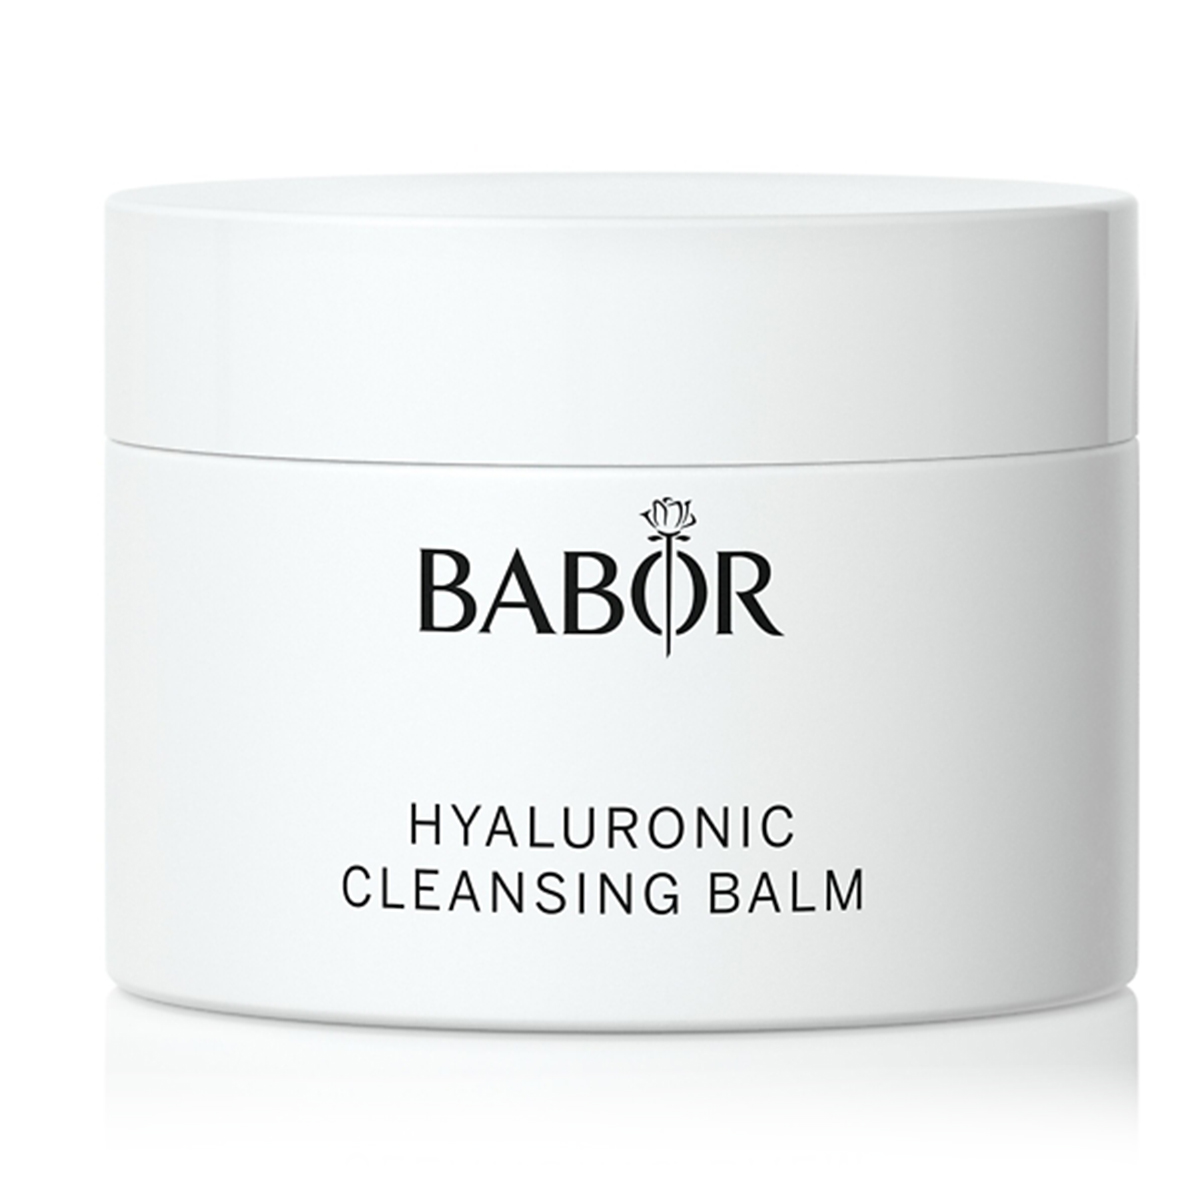 BABOR Hyaluronic Cleansing Balm, 150 ml